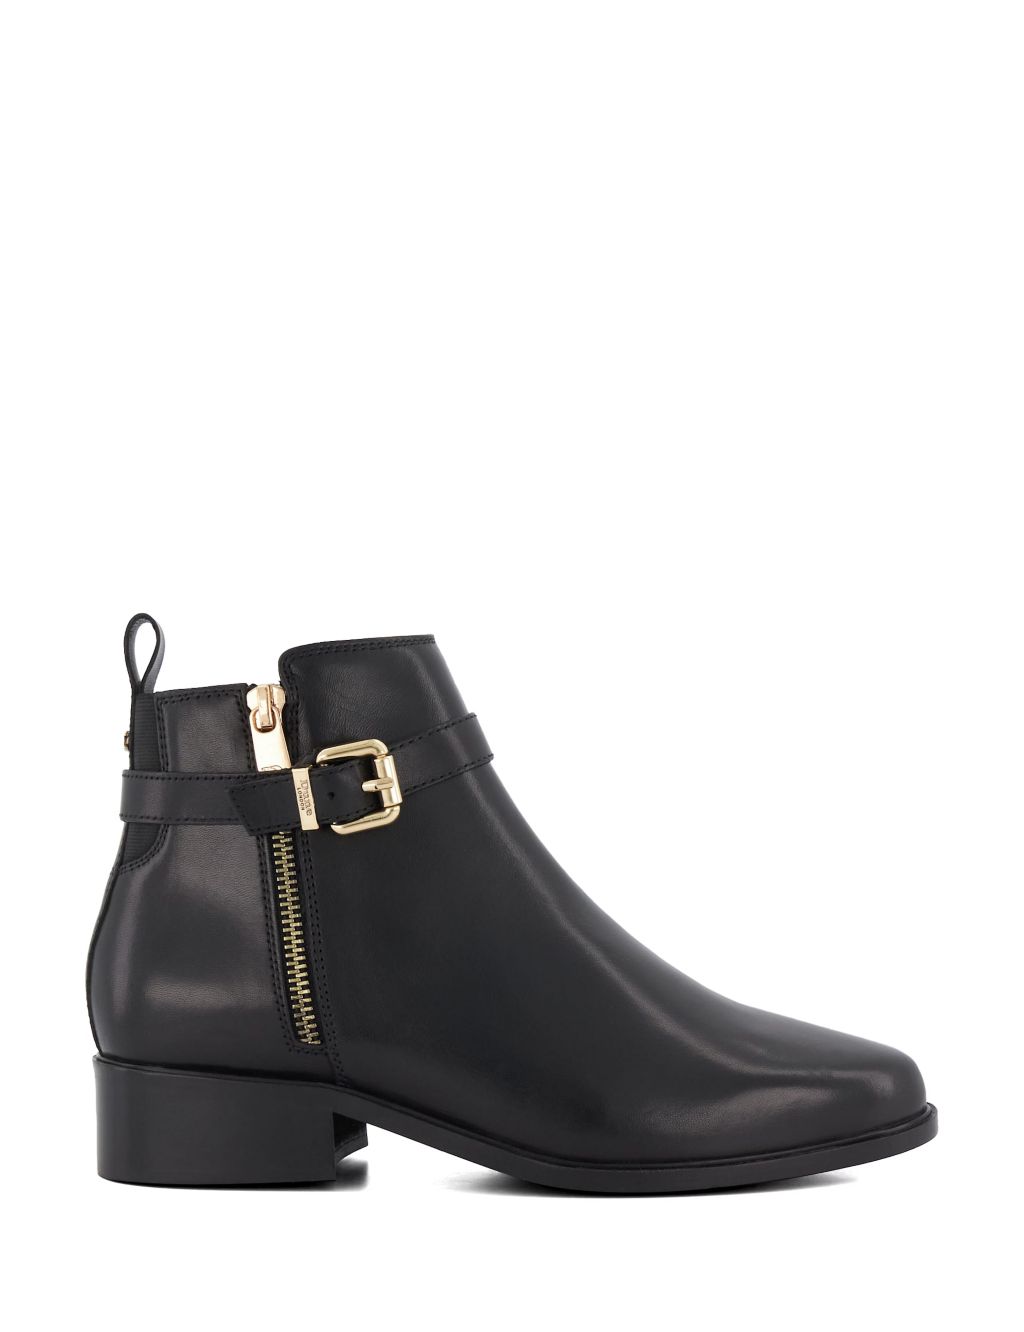 Leather Buckle Ankle Boots image 1